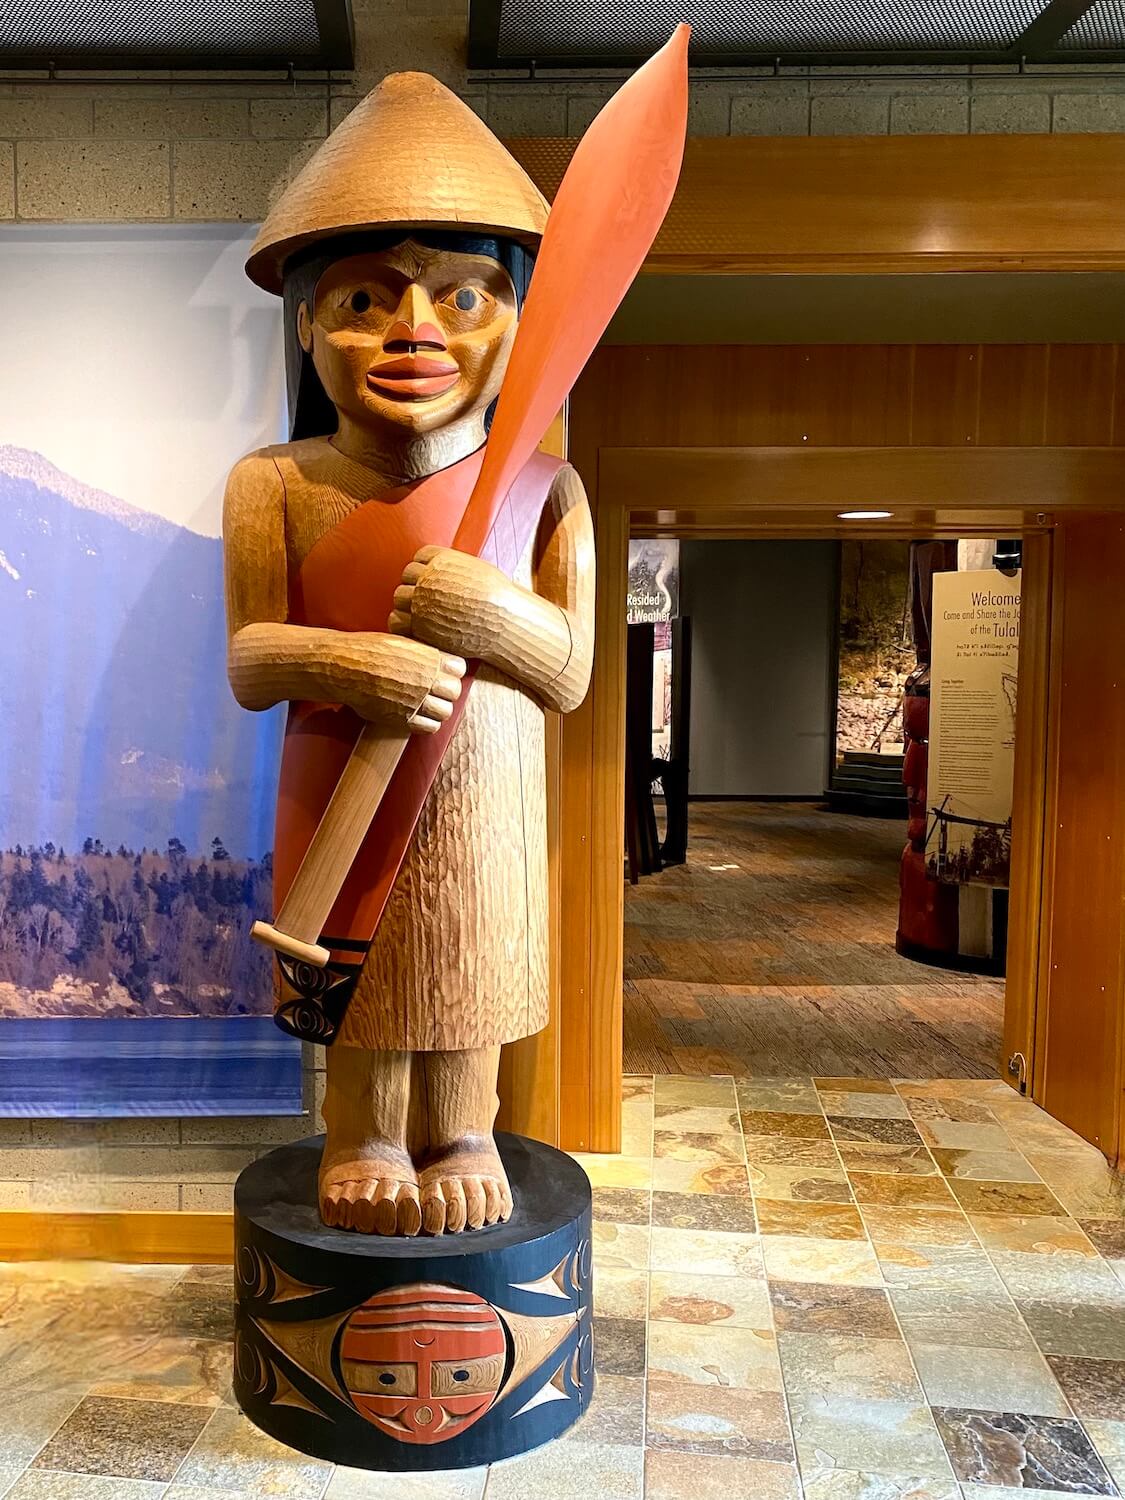 A tall carved wood figure stands to welcome visitors to the Hibulb Cultural Center. The Indian is wearing a traditional cedar hat and holding a paddle to a canoe.